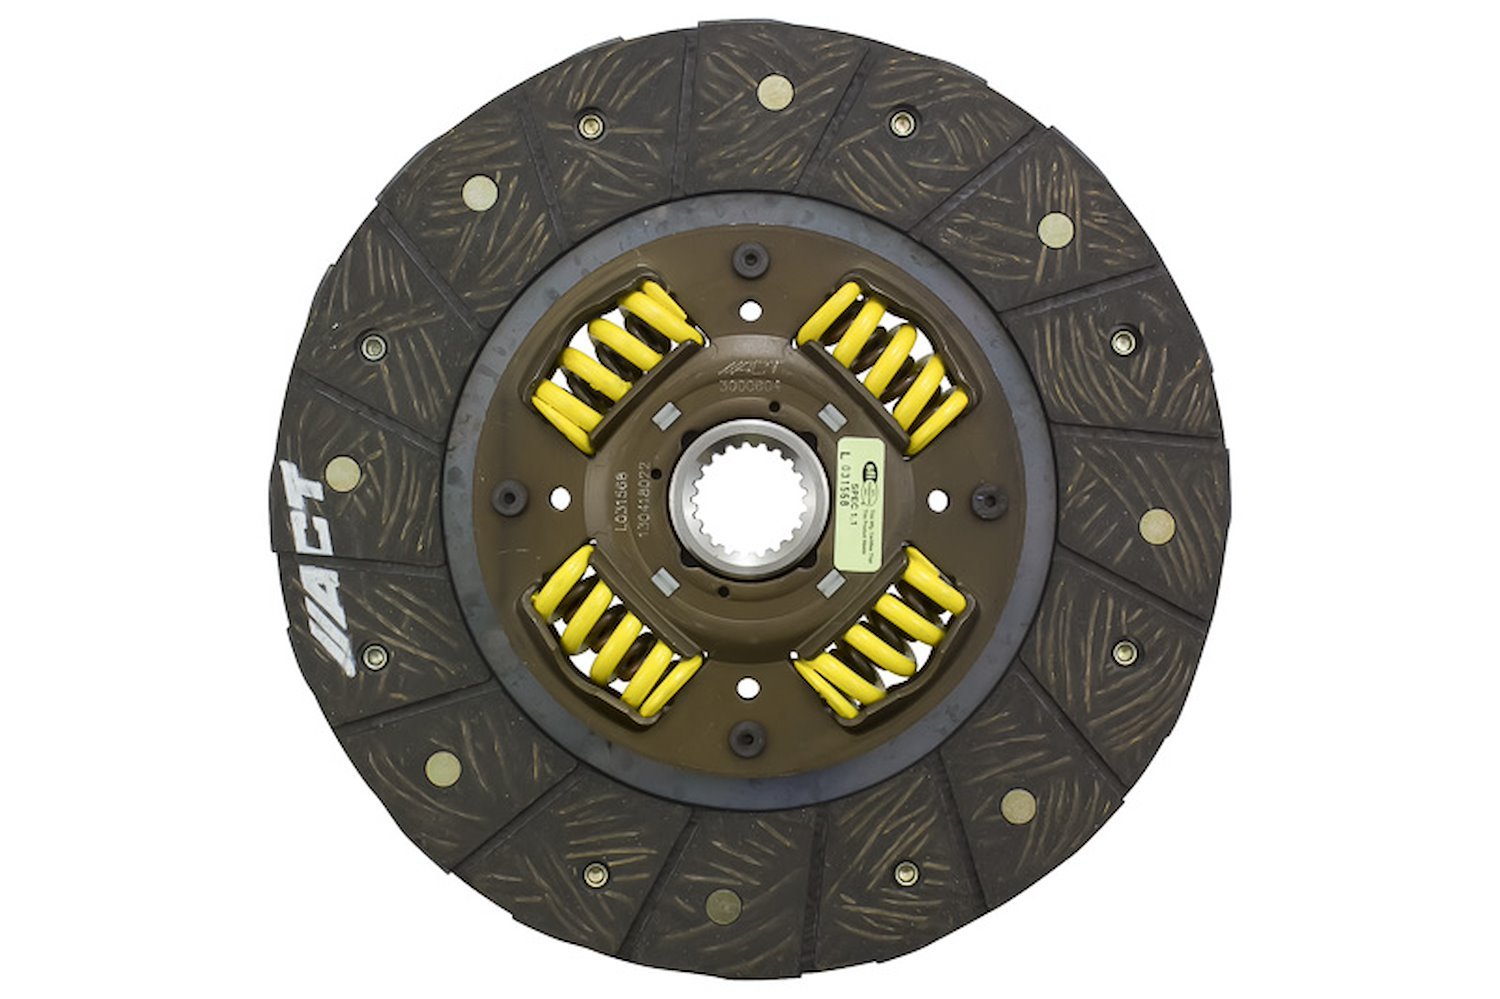 Performance Street Sprung Disc Transmission Clutch Friction Plate